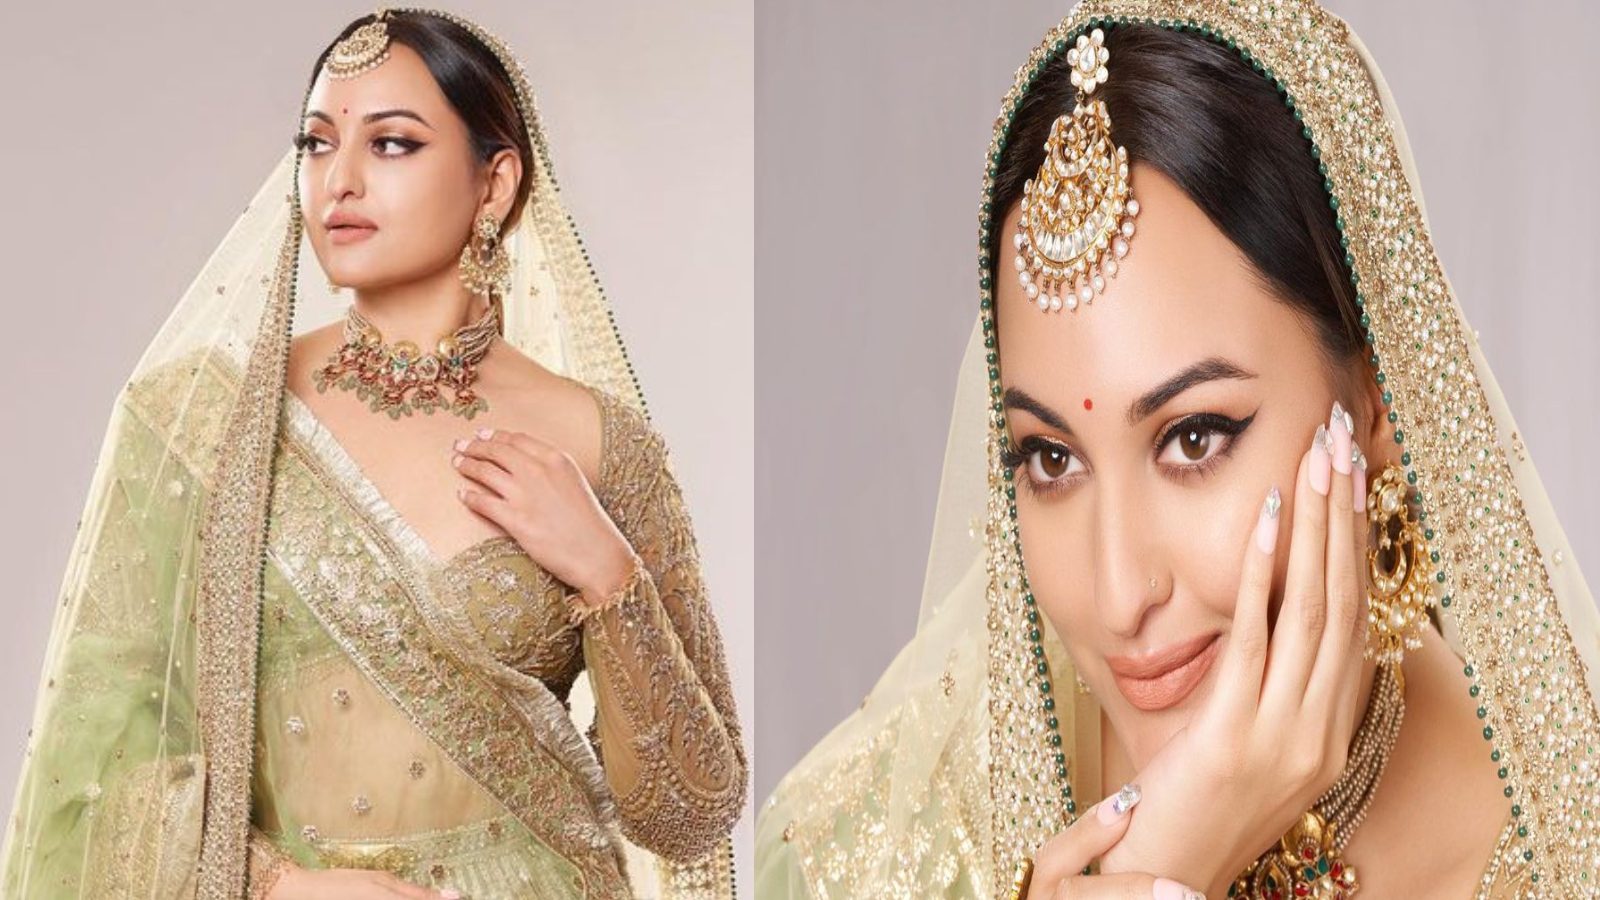 Sonakshi Sinha In Heavy Gold Lehenga Is A Clear Royalty